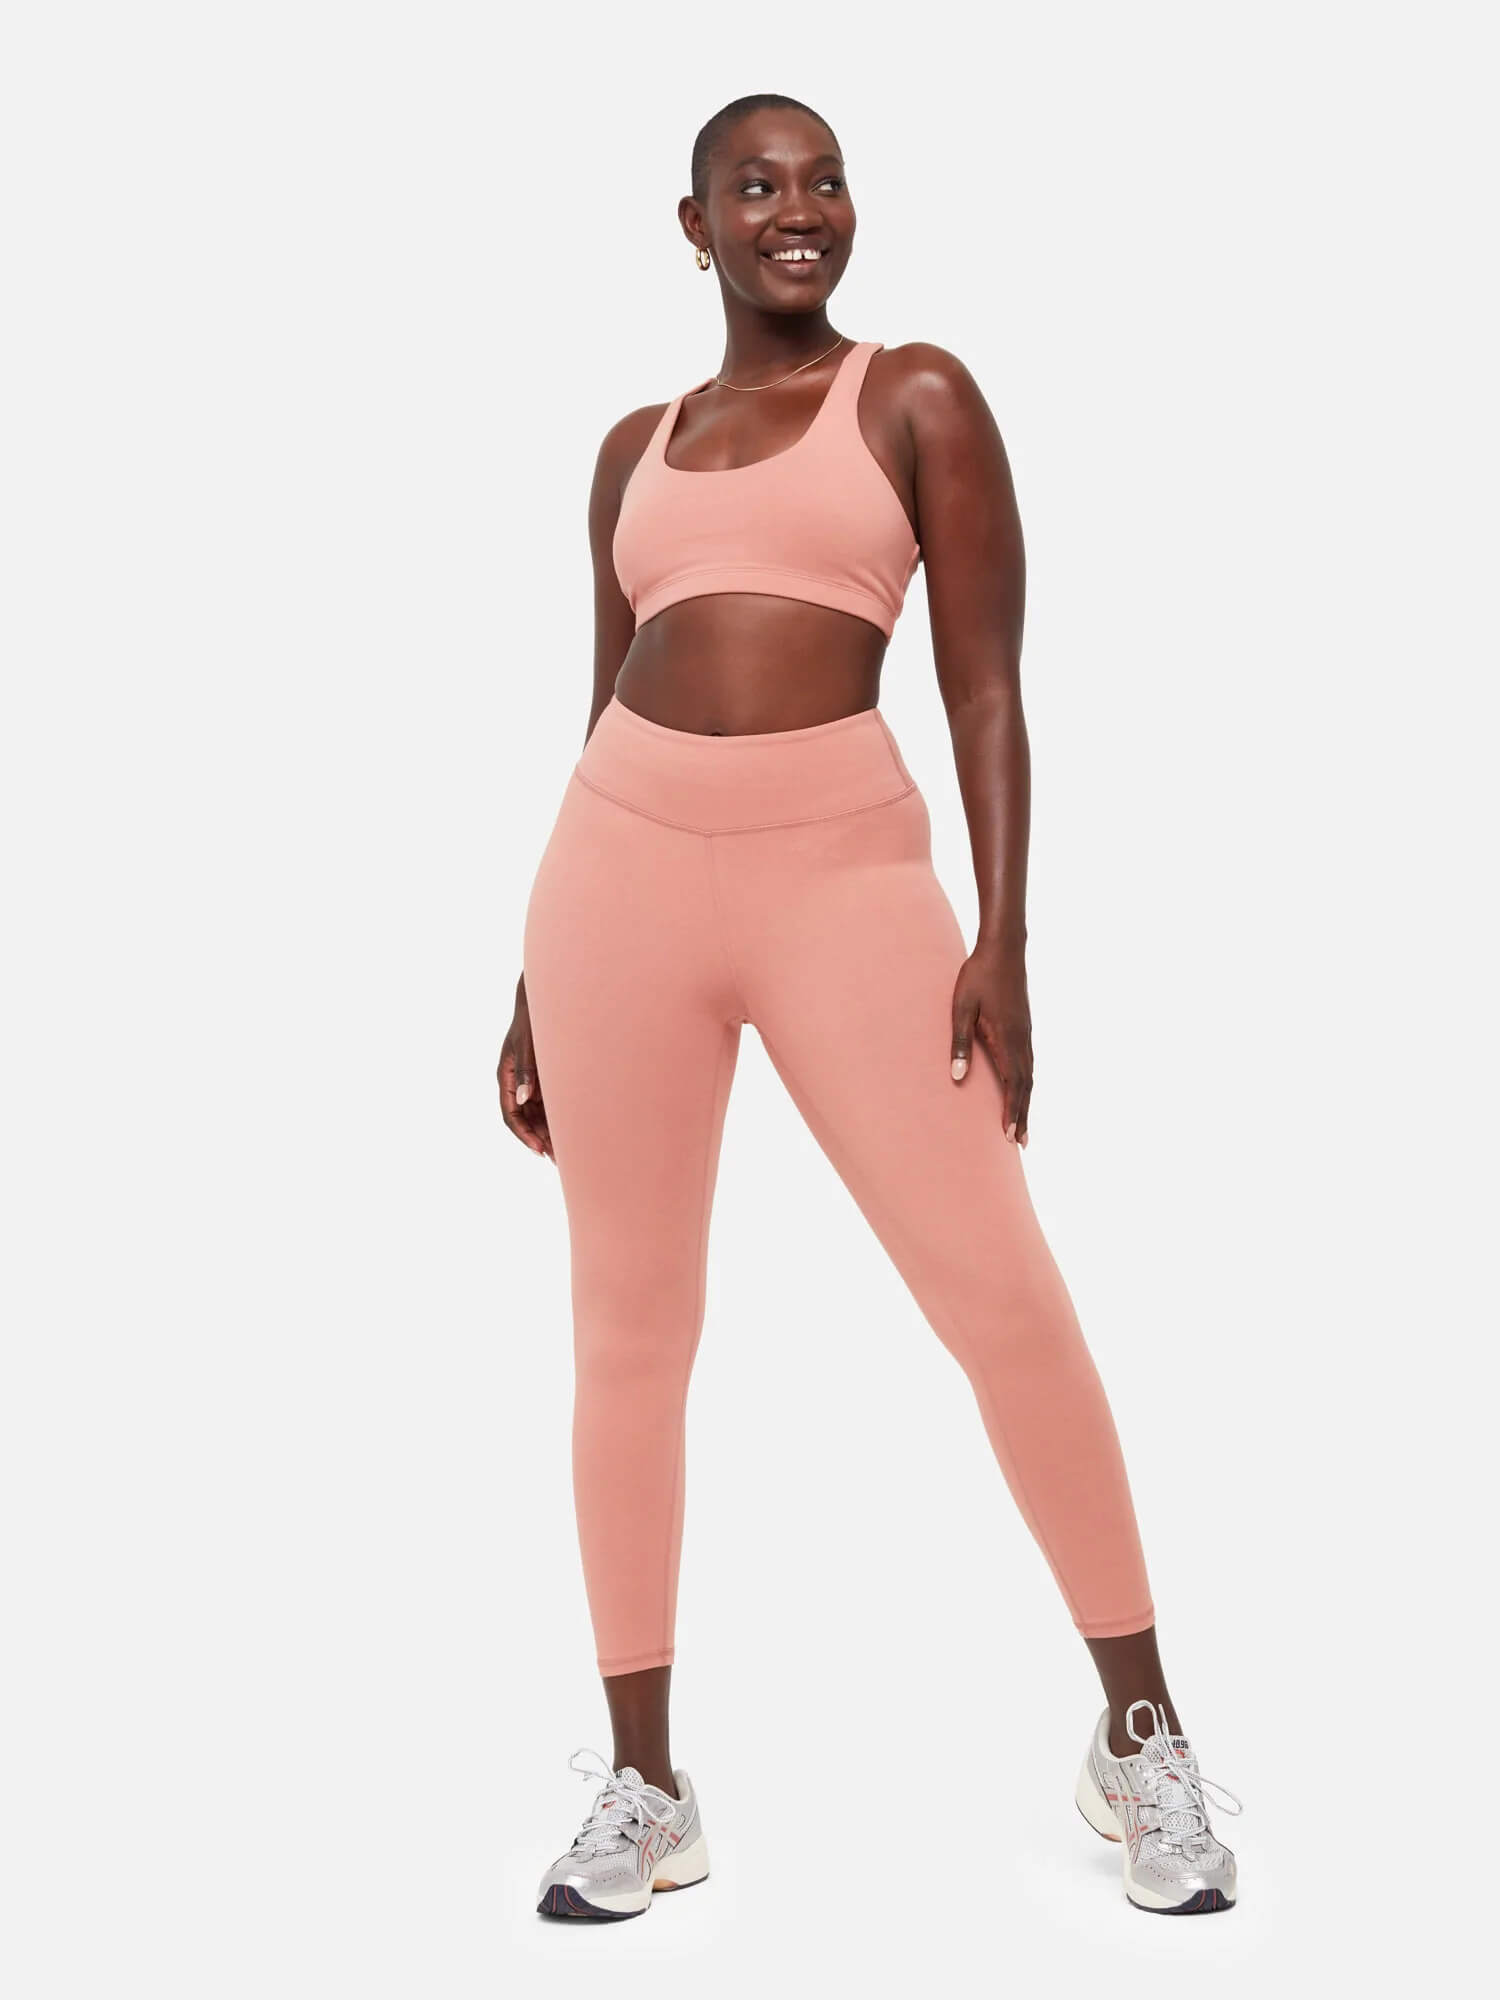 A model wears a coral cotton legging and bra set.